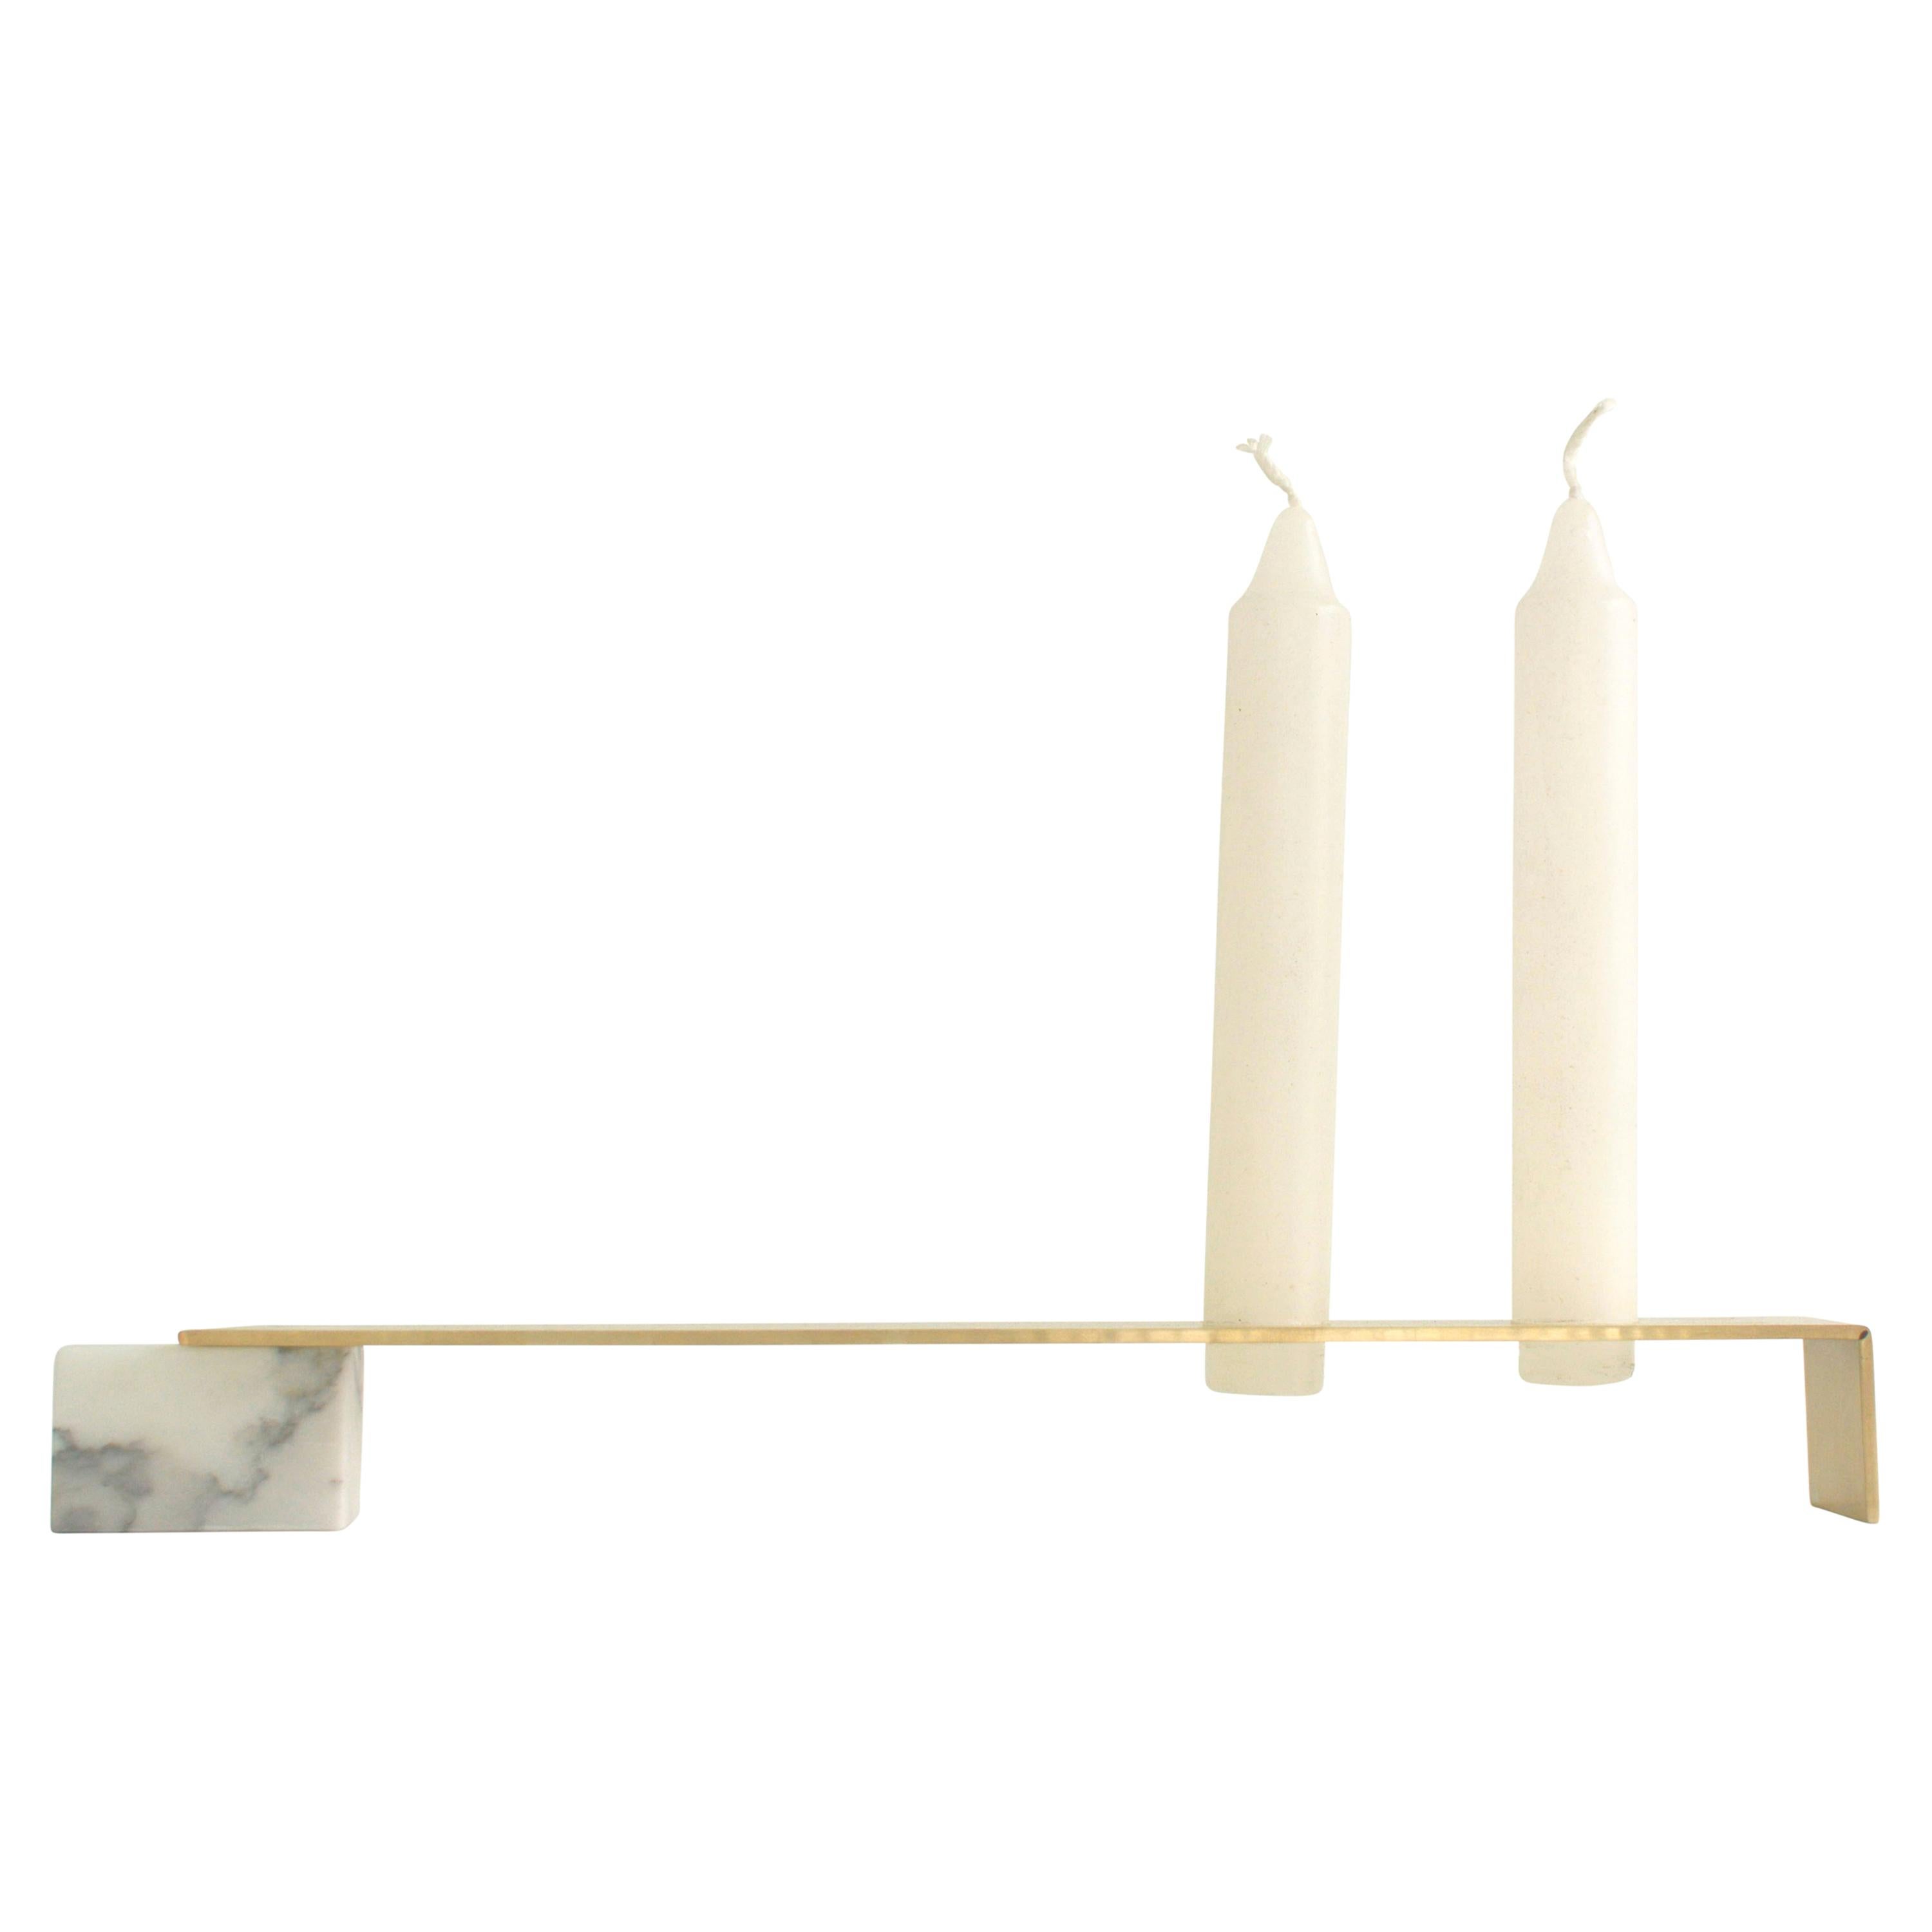 Unfolding Marble Candleholders by Periclis Frementitis